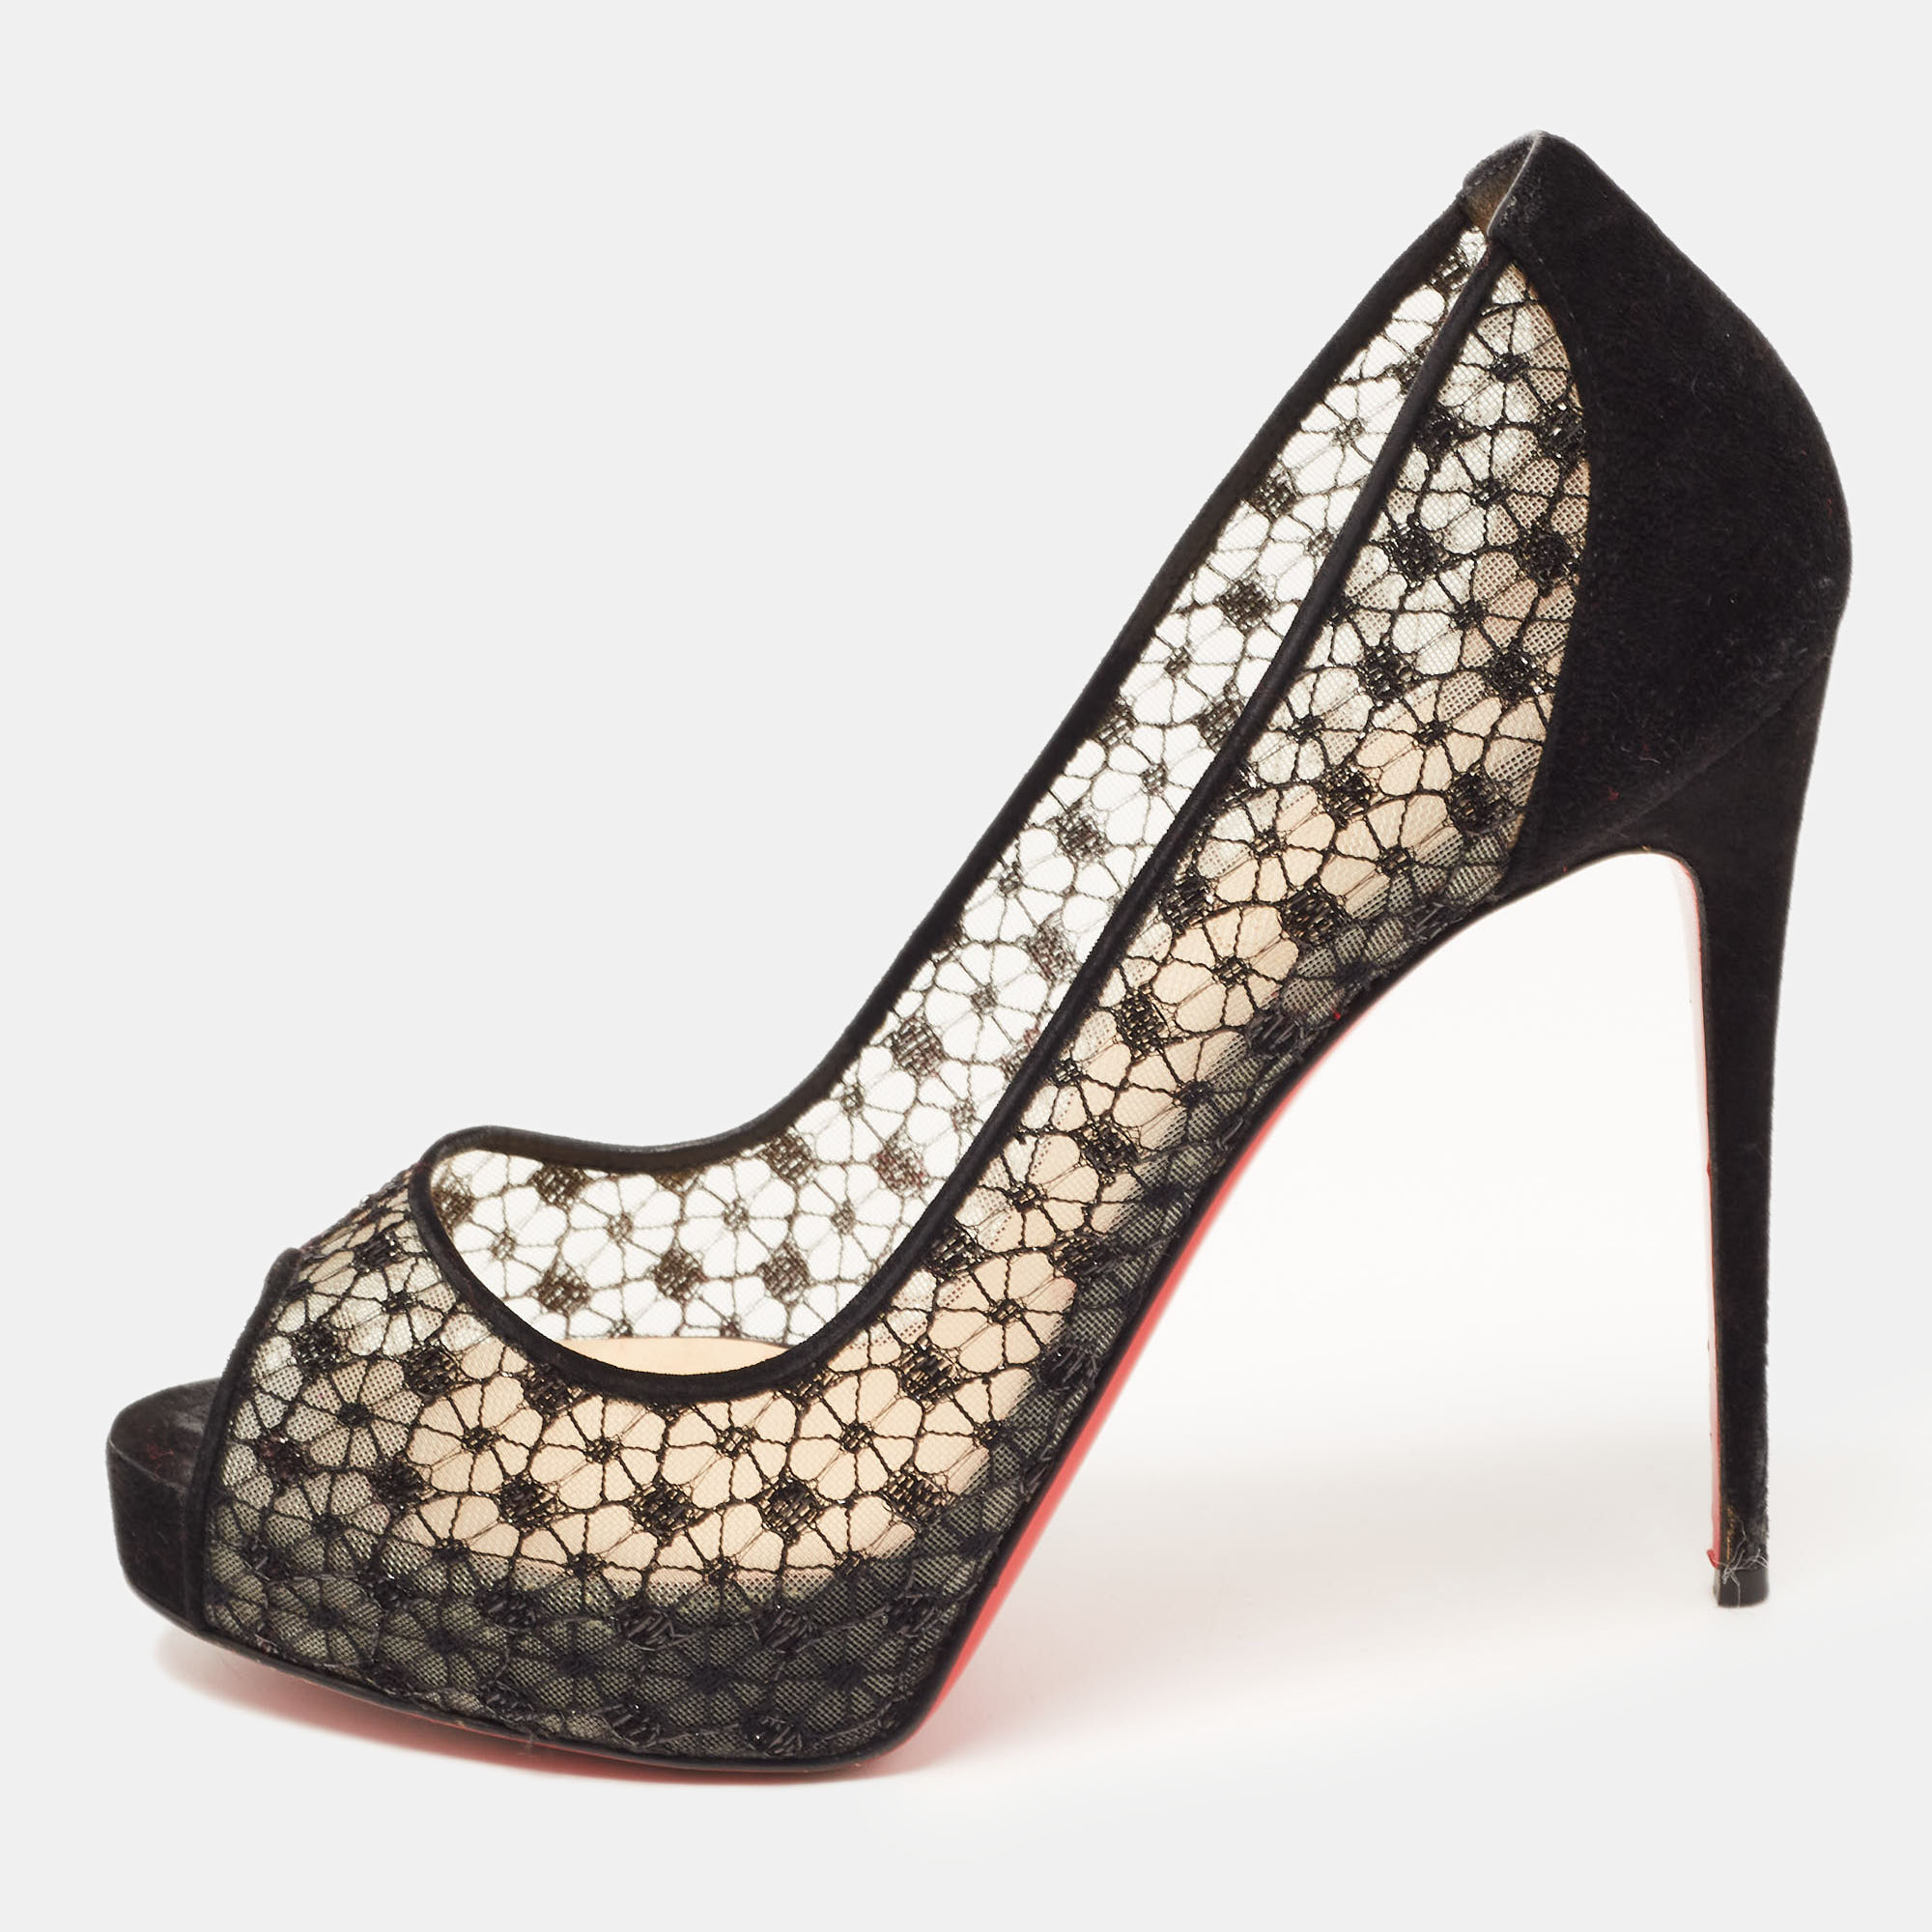 Stride through the day with confidence by adorning this pair of Christian Louboutin pumps. Created from lace and suede its well designed curves will elegantly outline your feet. The 12cm heels of these peep toe shoes will take your fashion sense to new heights.